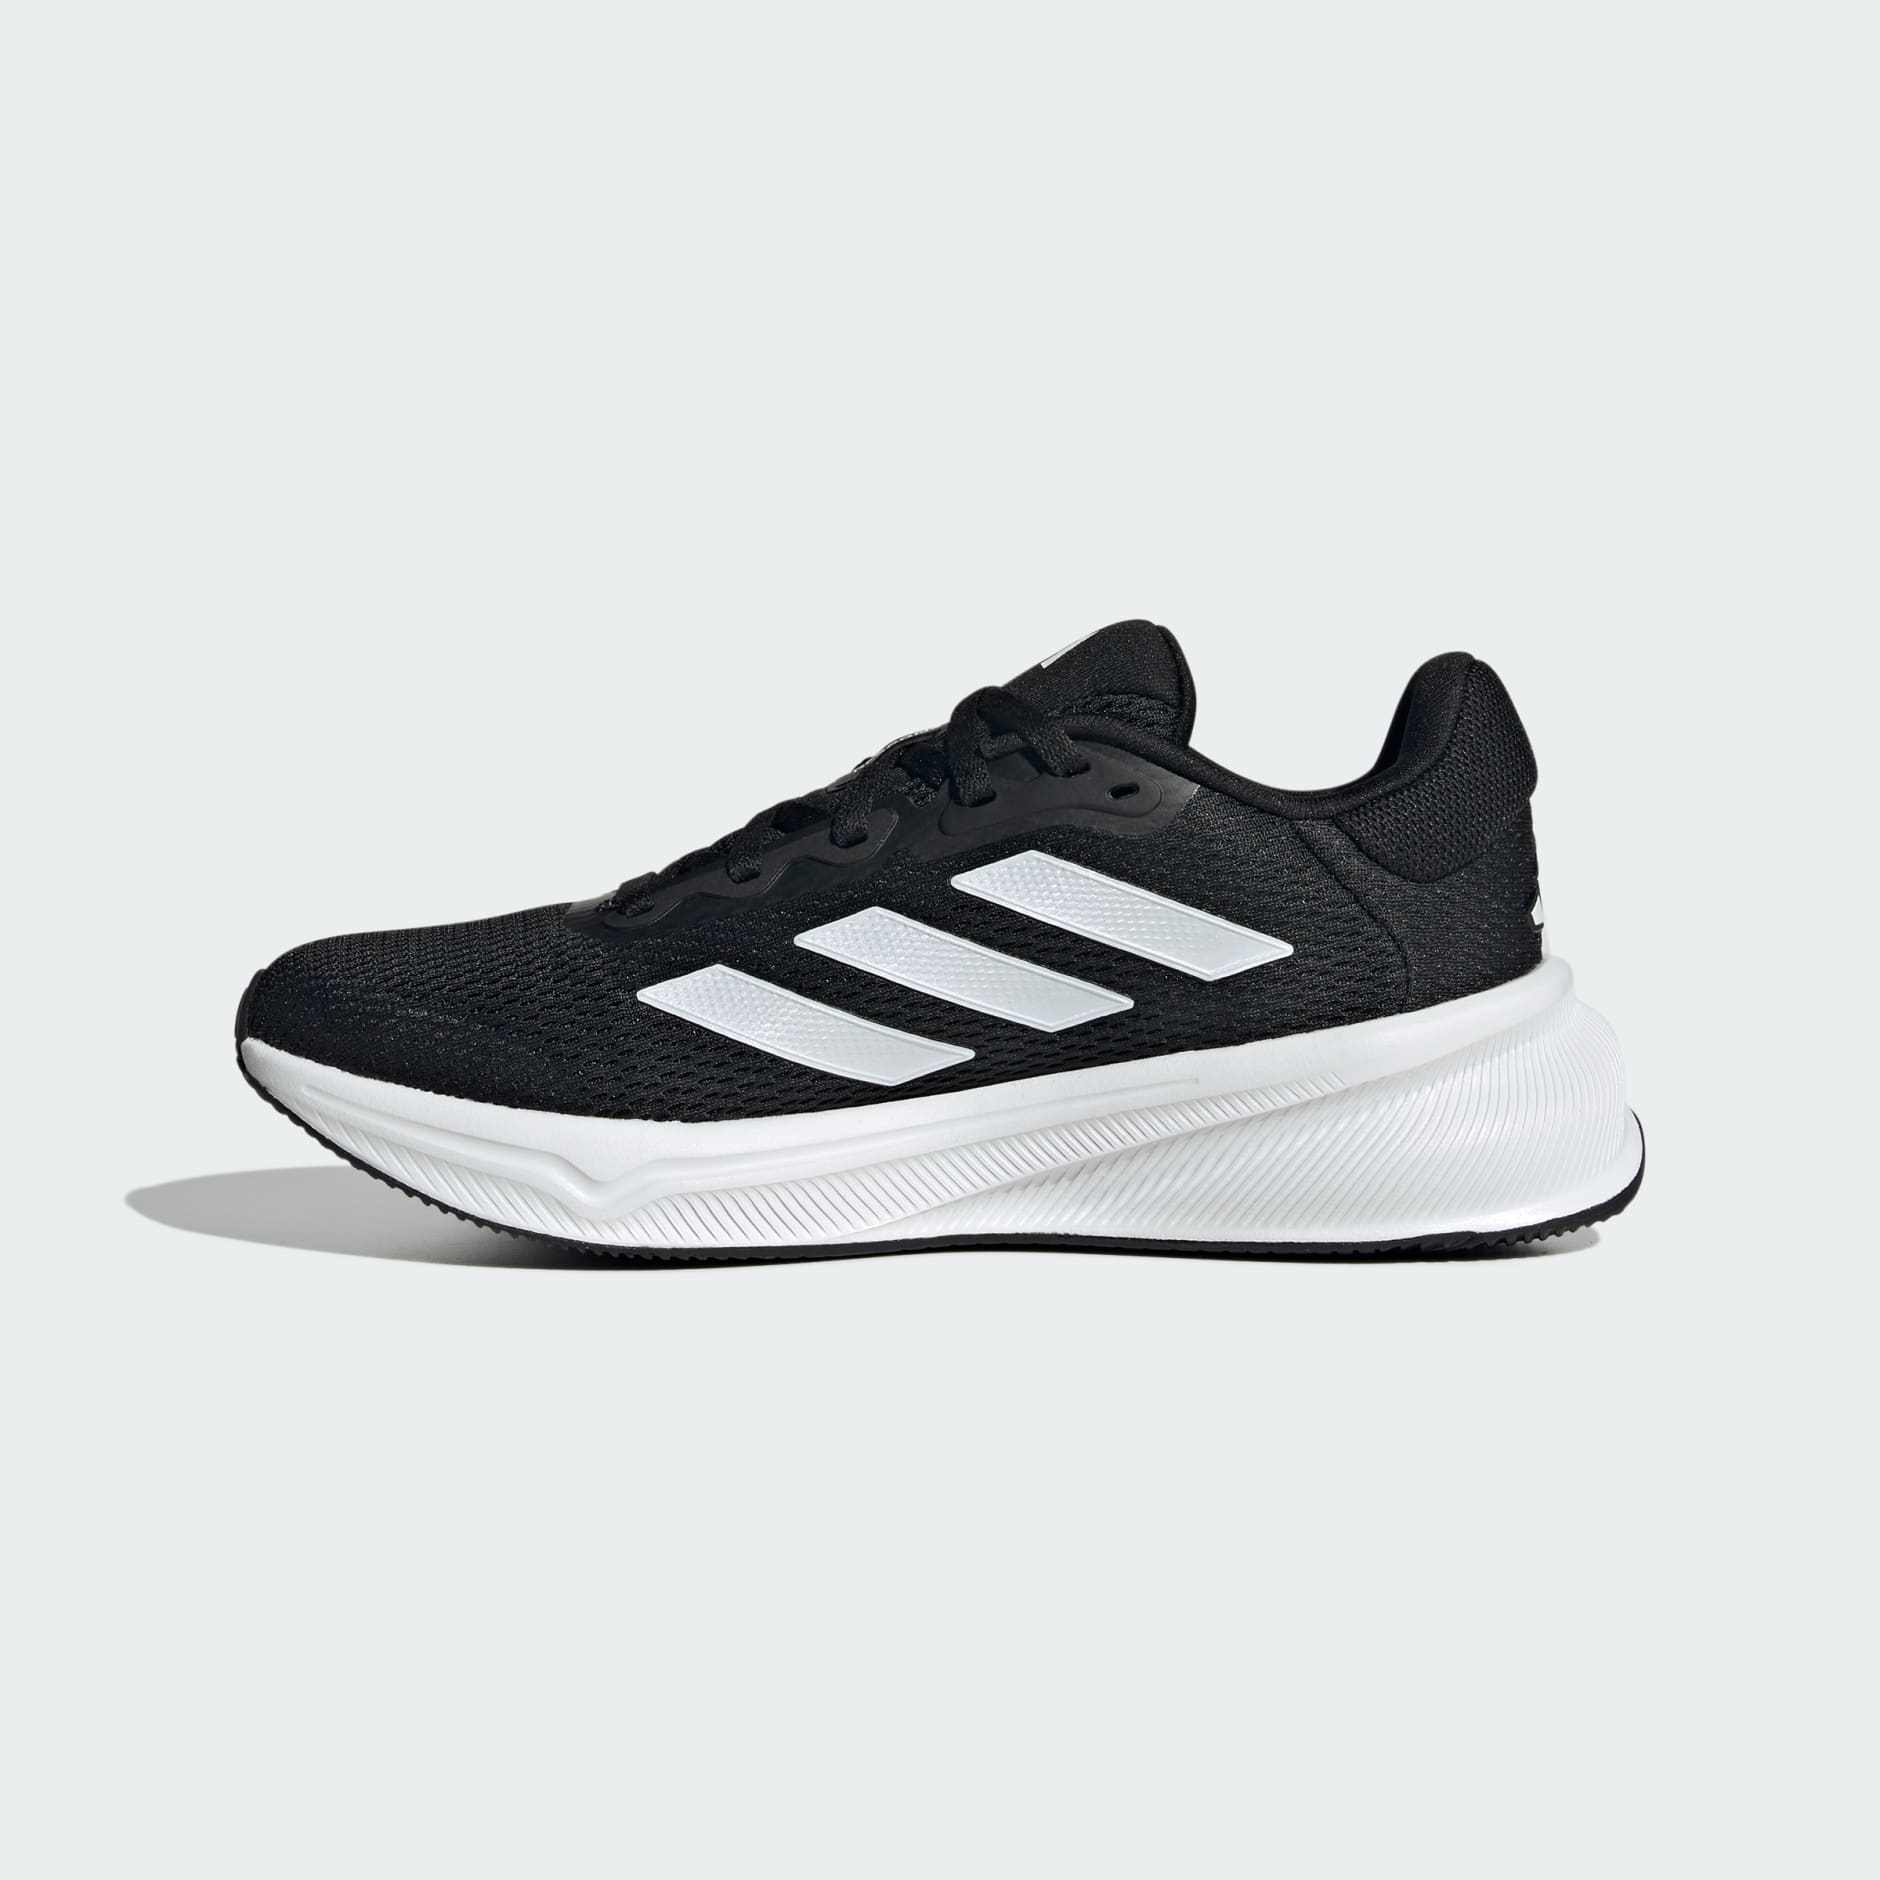 Shoes - Response Shoes - Black | adidas South Africa